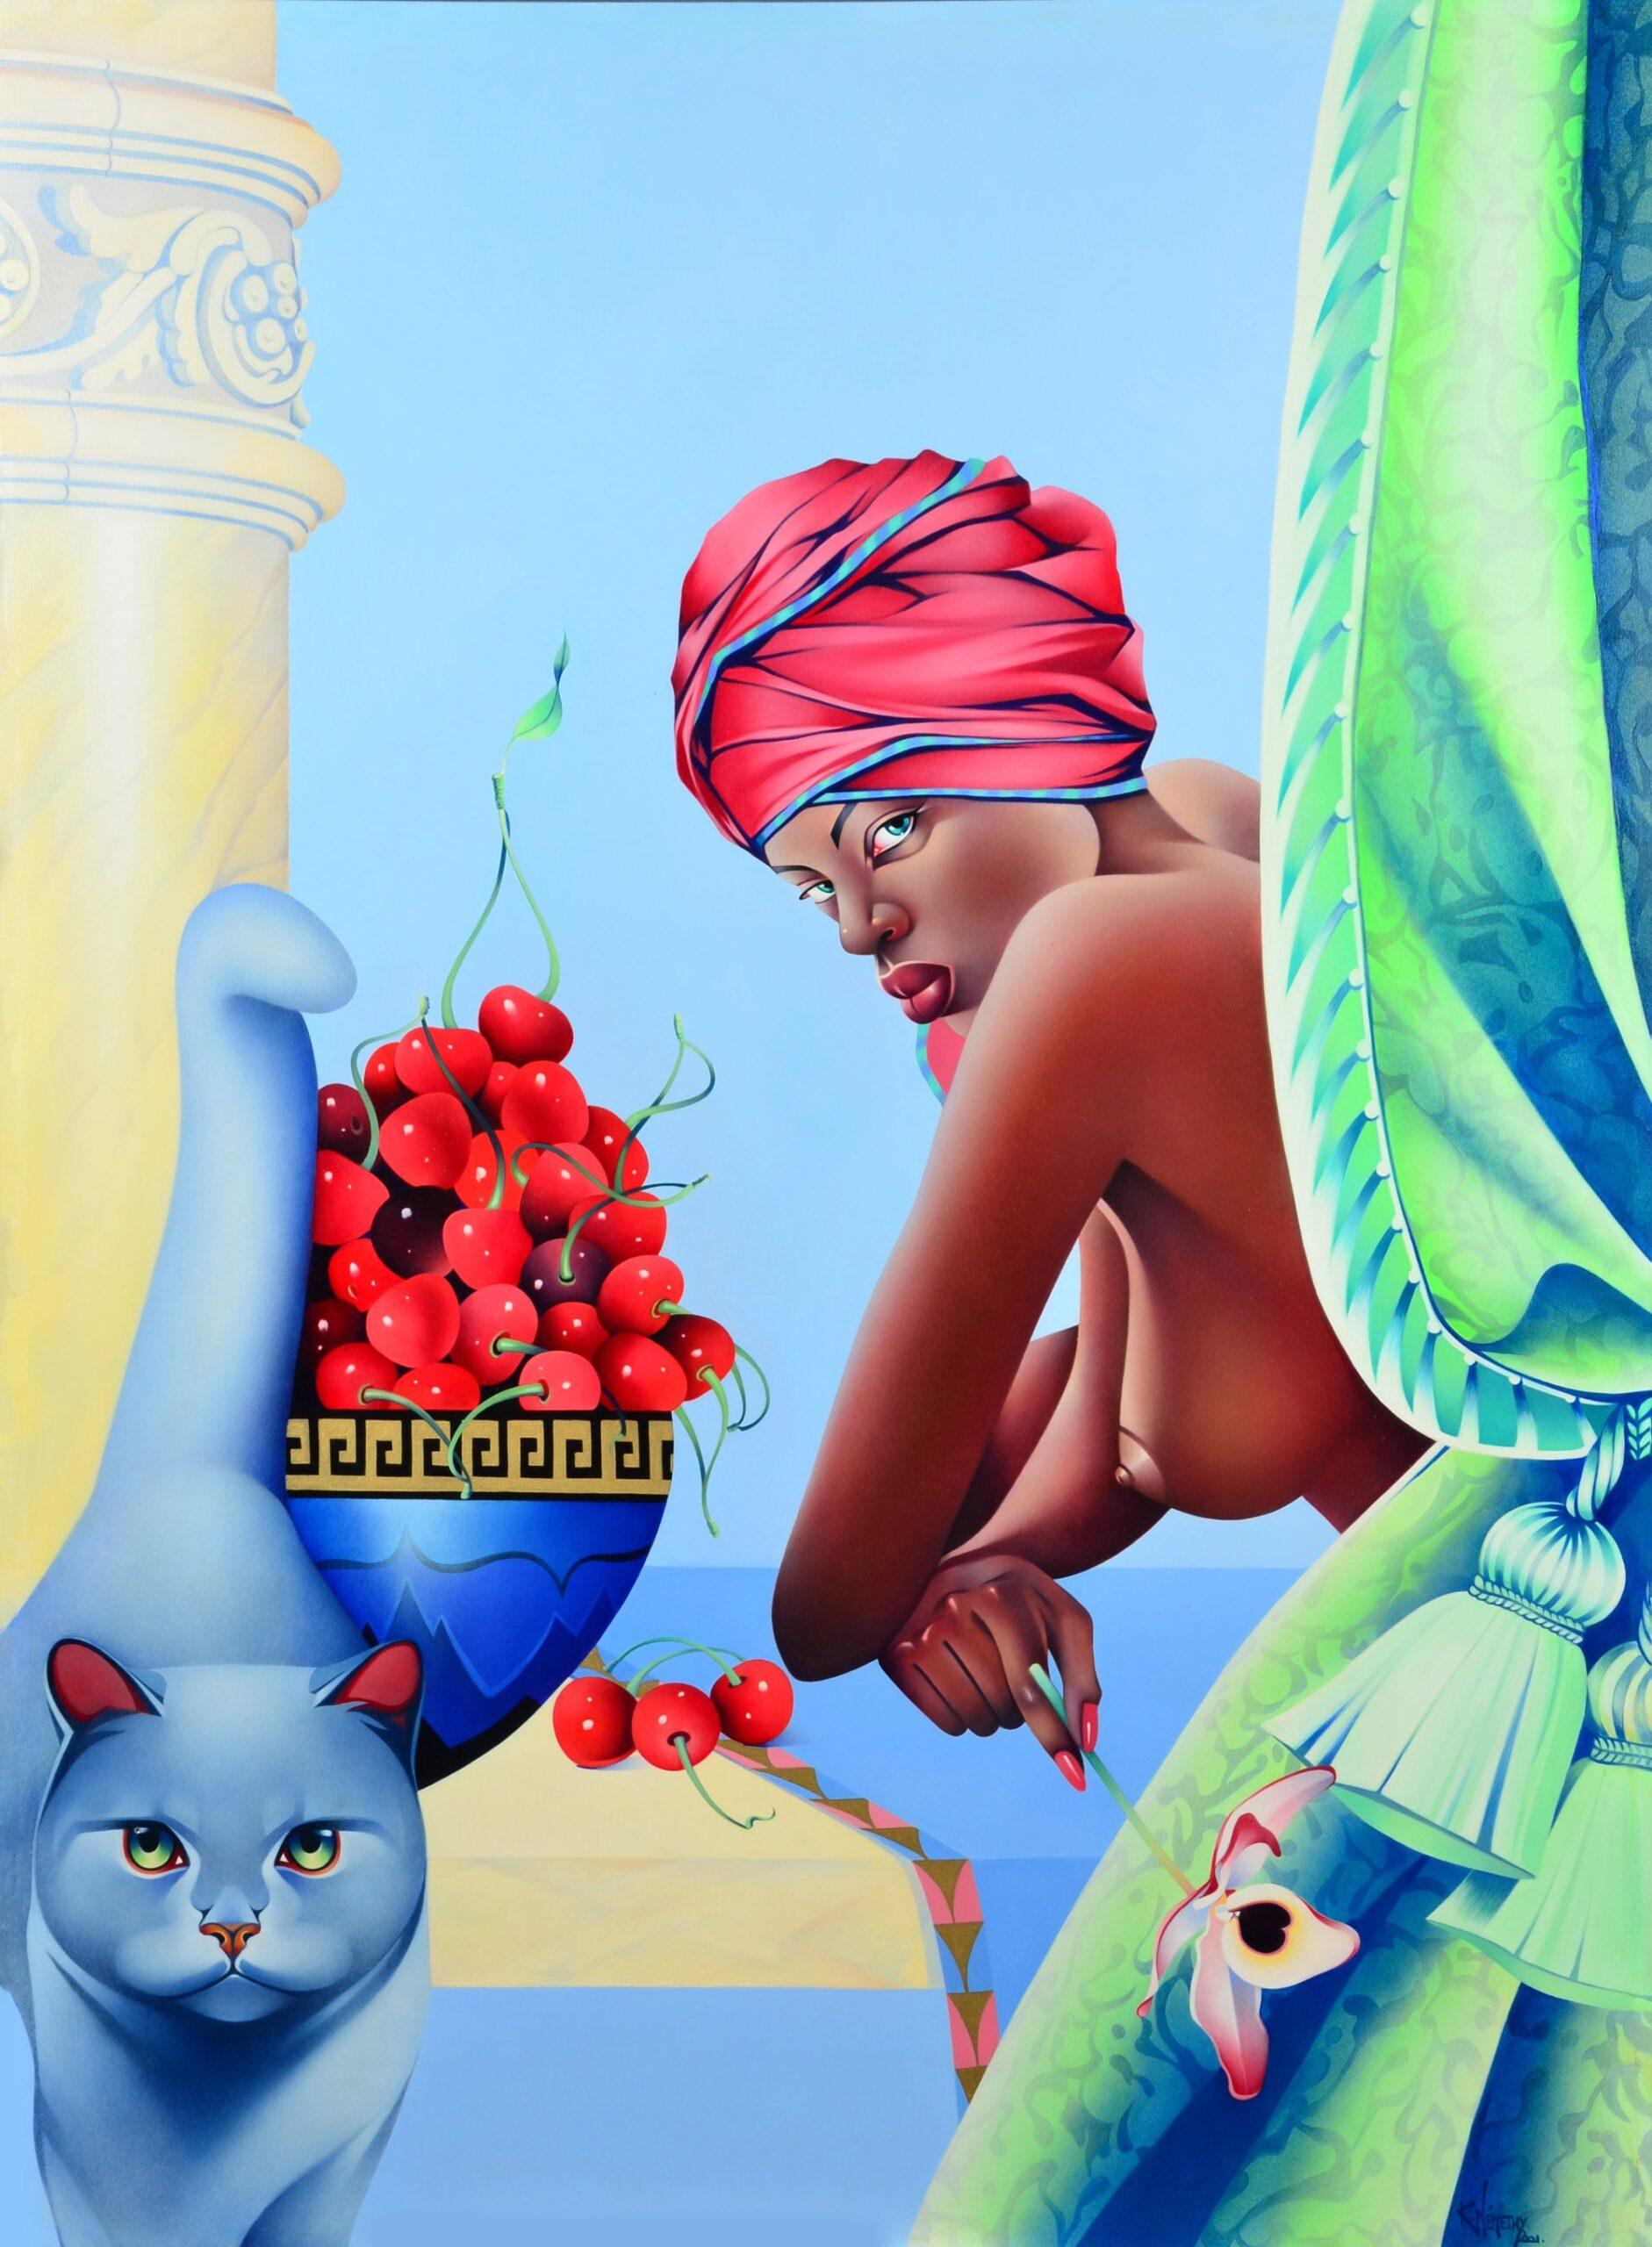 African beauty by Katalin Nemethy - Painting by Unknown